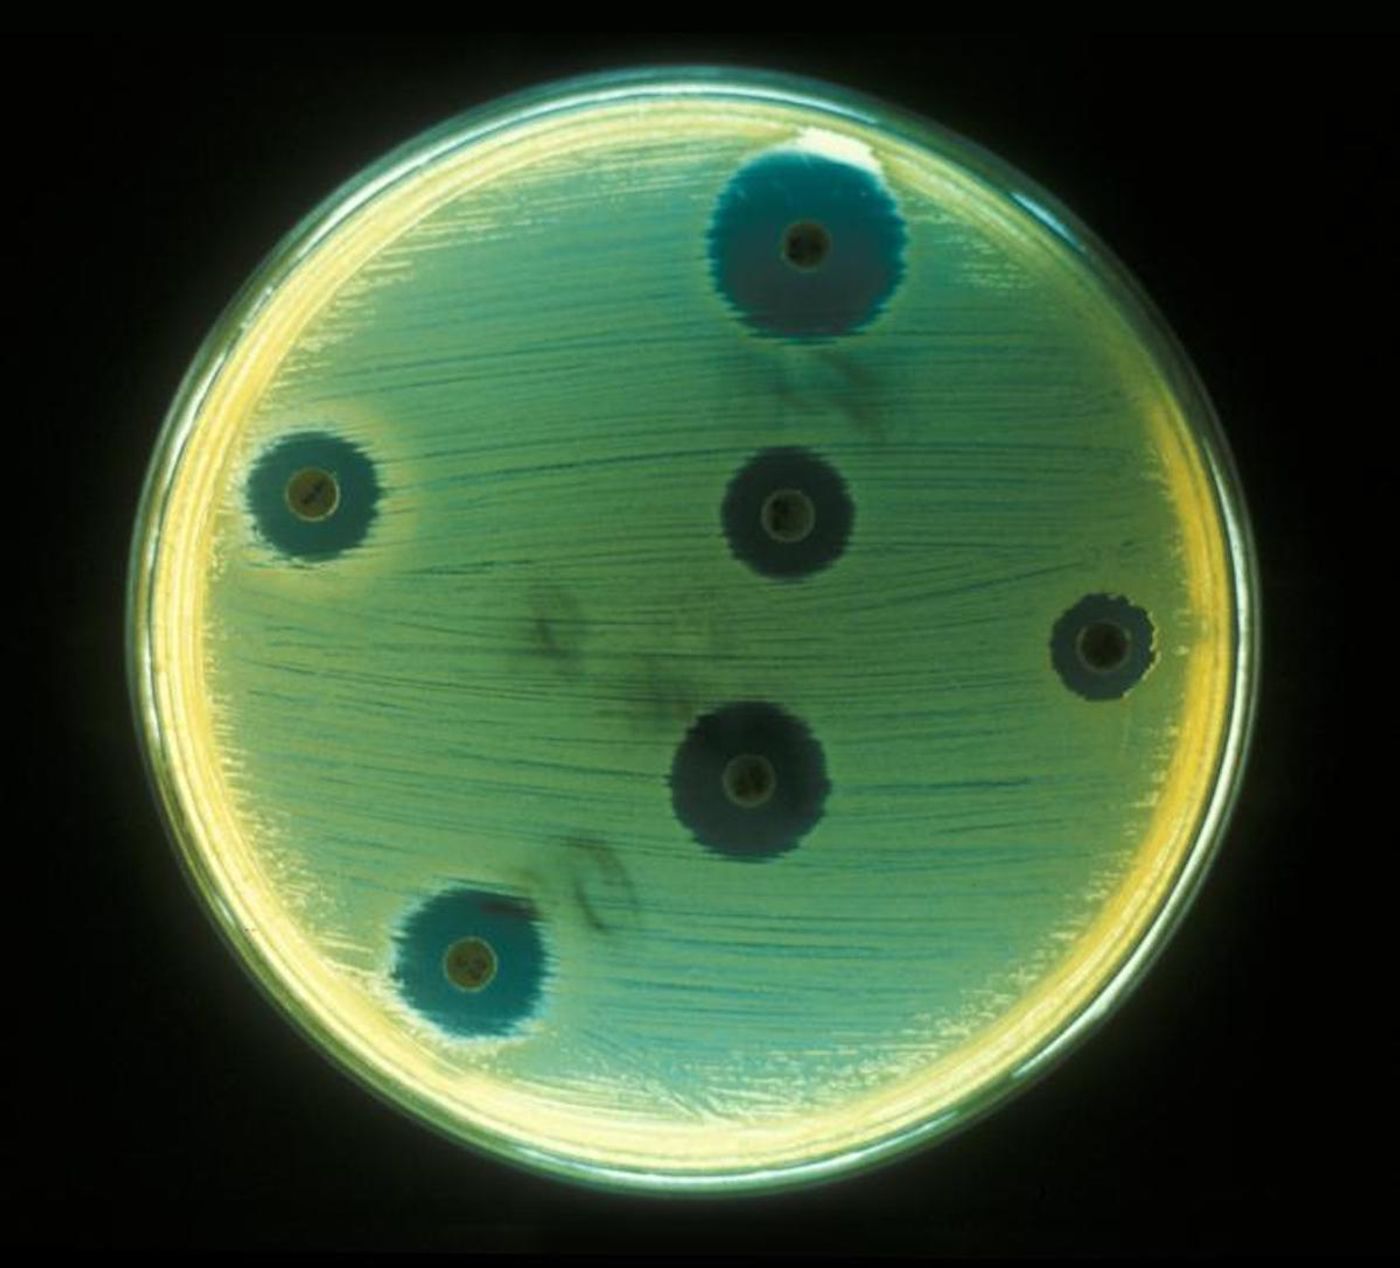  A Petri dish inoculated with Staphylococcus aureus for an antimicrobial sensitivity test / Credit: CDC/Don Stalons